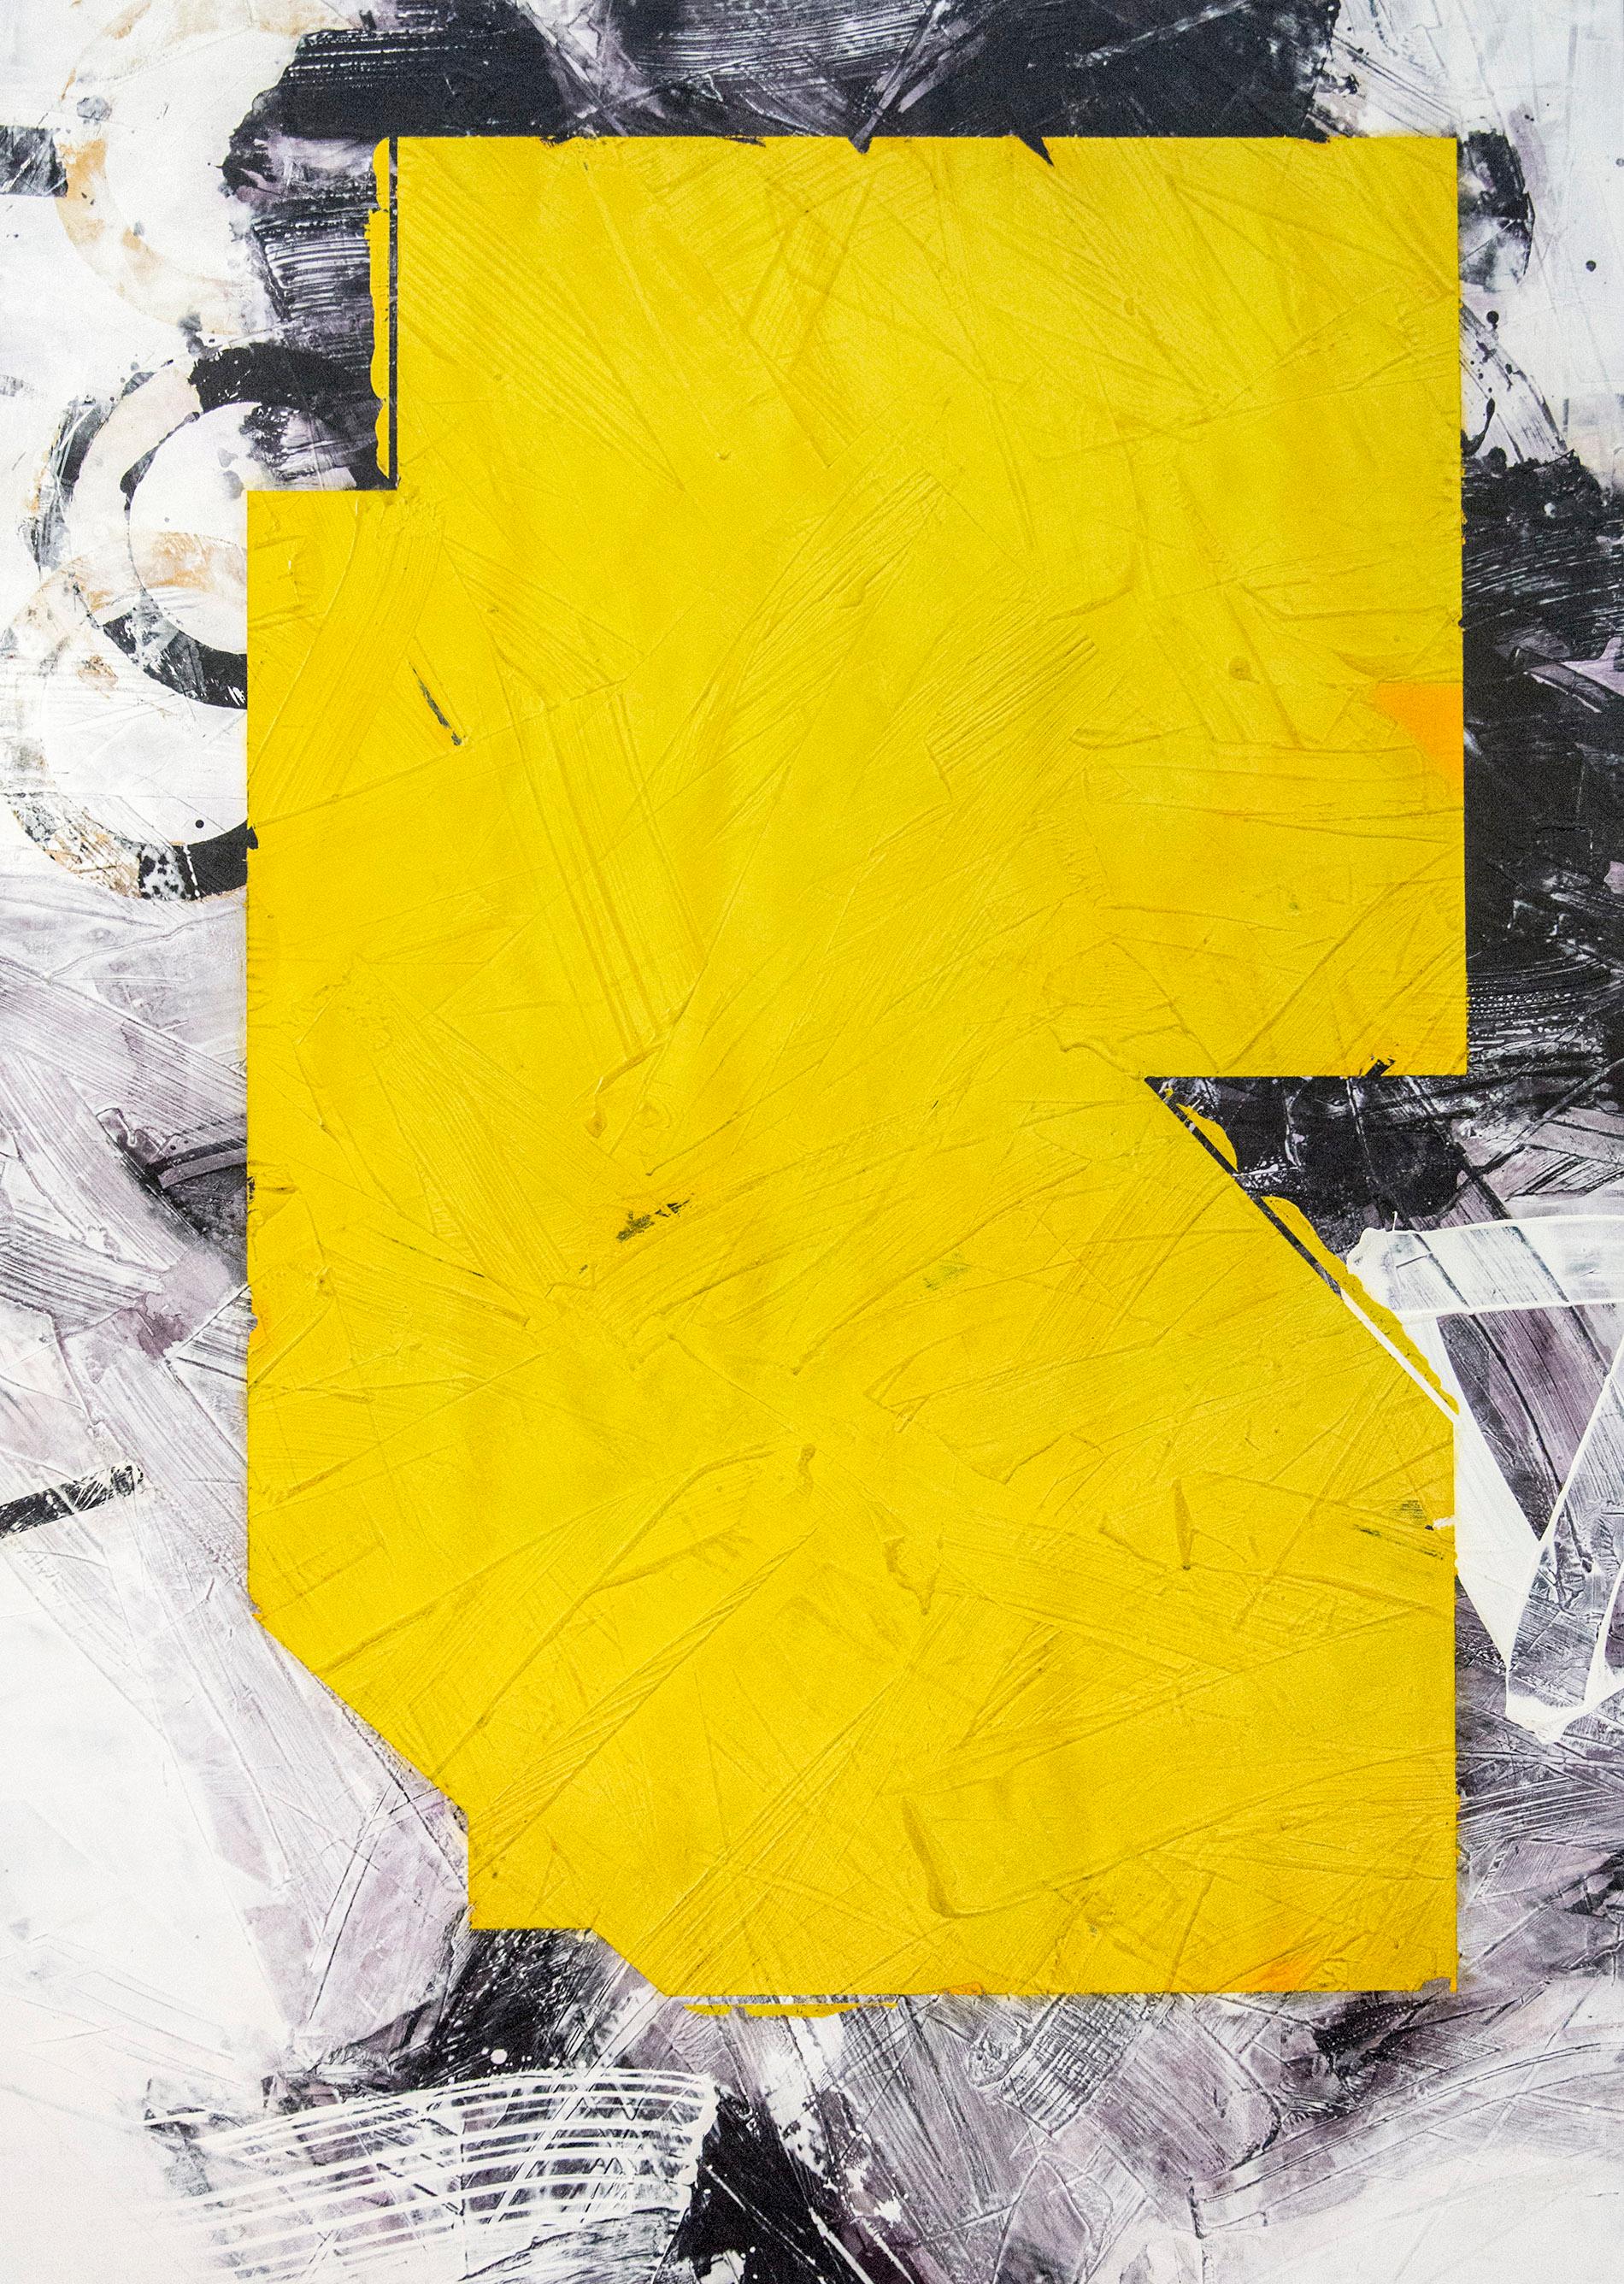 Yellow No 27 - large, bold abstract shapes, marble dust, acrylic, wax, on canvas